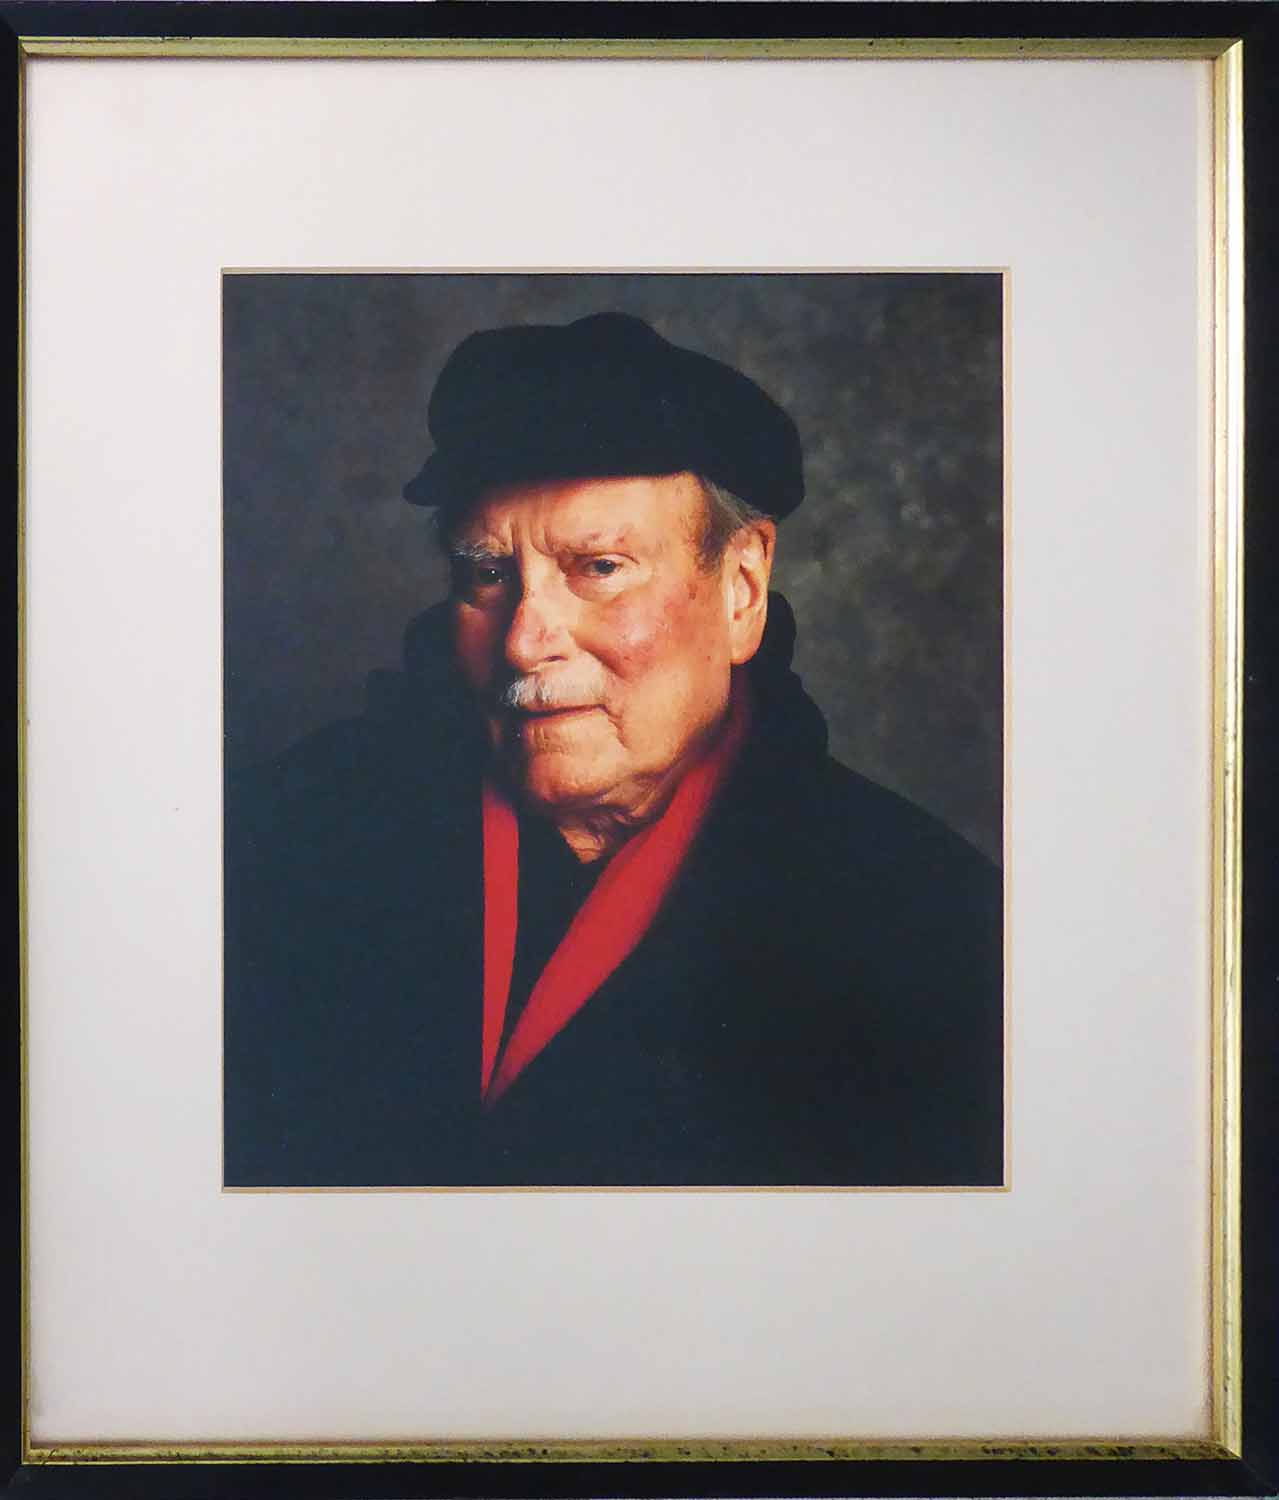 LORD SNOWDON (1930-2017) 'Portrait of Laurence Olivier', signed and dated verso, April 1987,